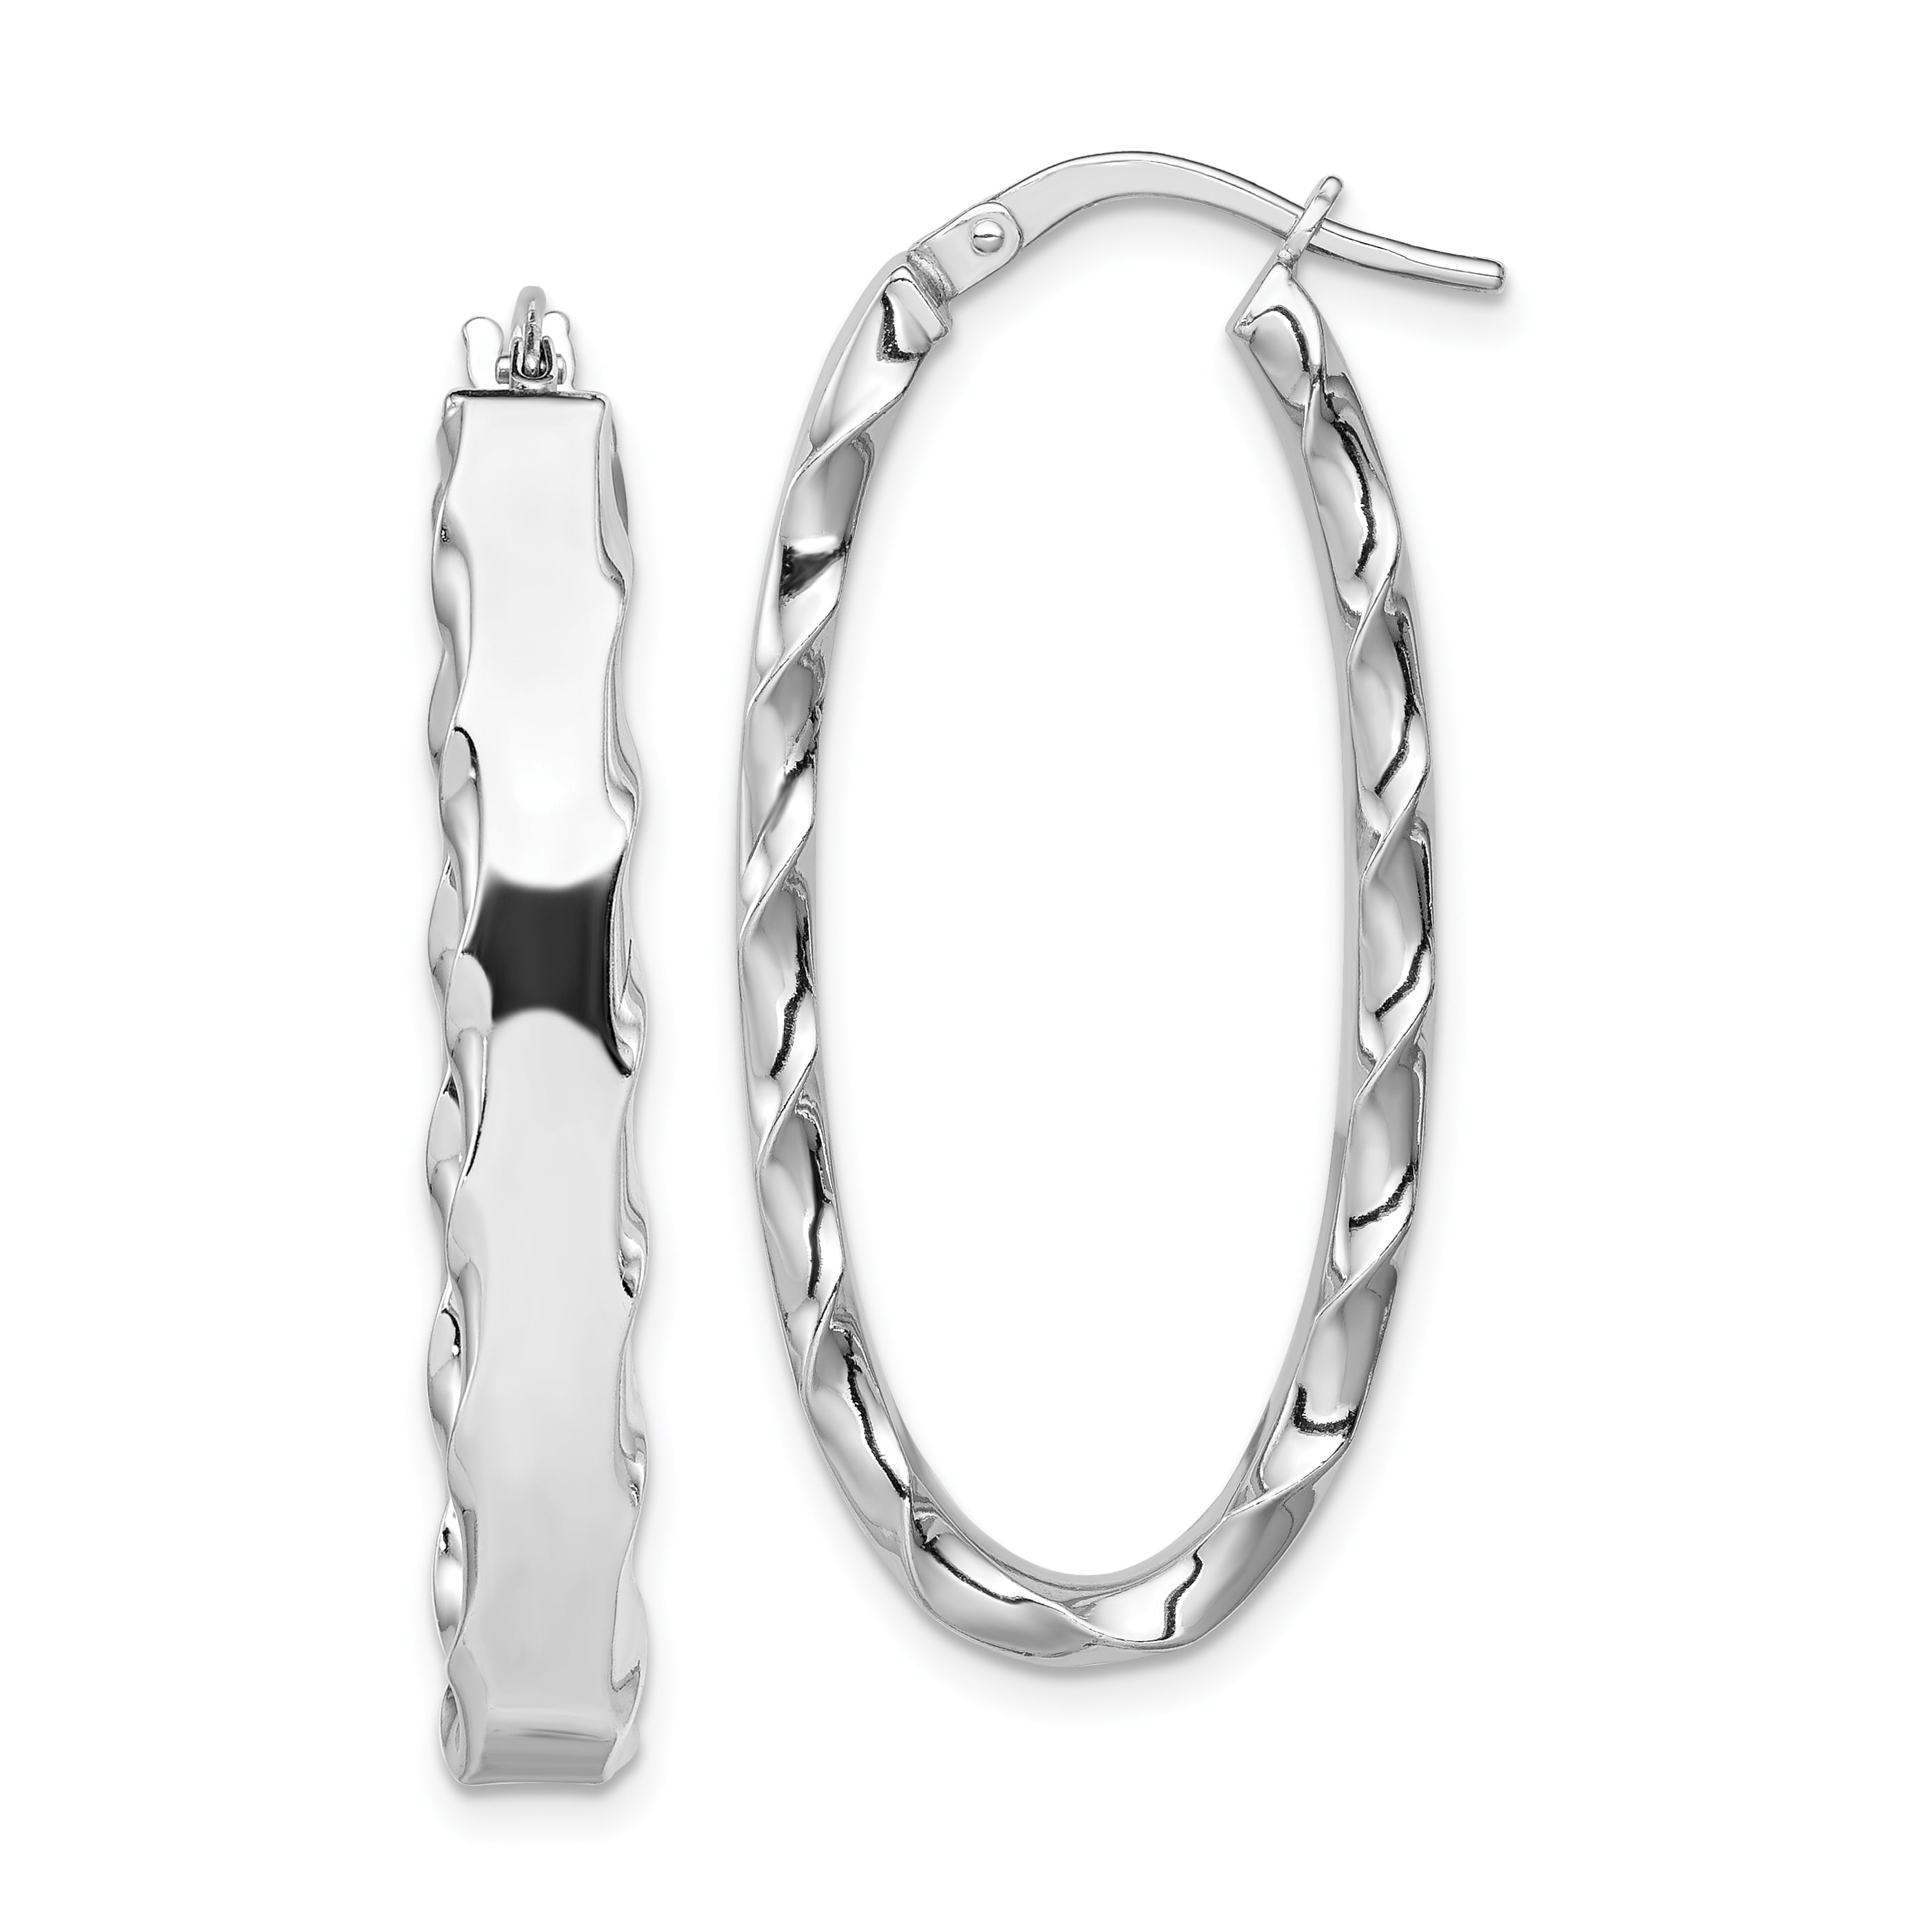 1Ct Diamond Hoop Earrings in 14K White Gold Solid Sterling Silver Womens Gifts